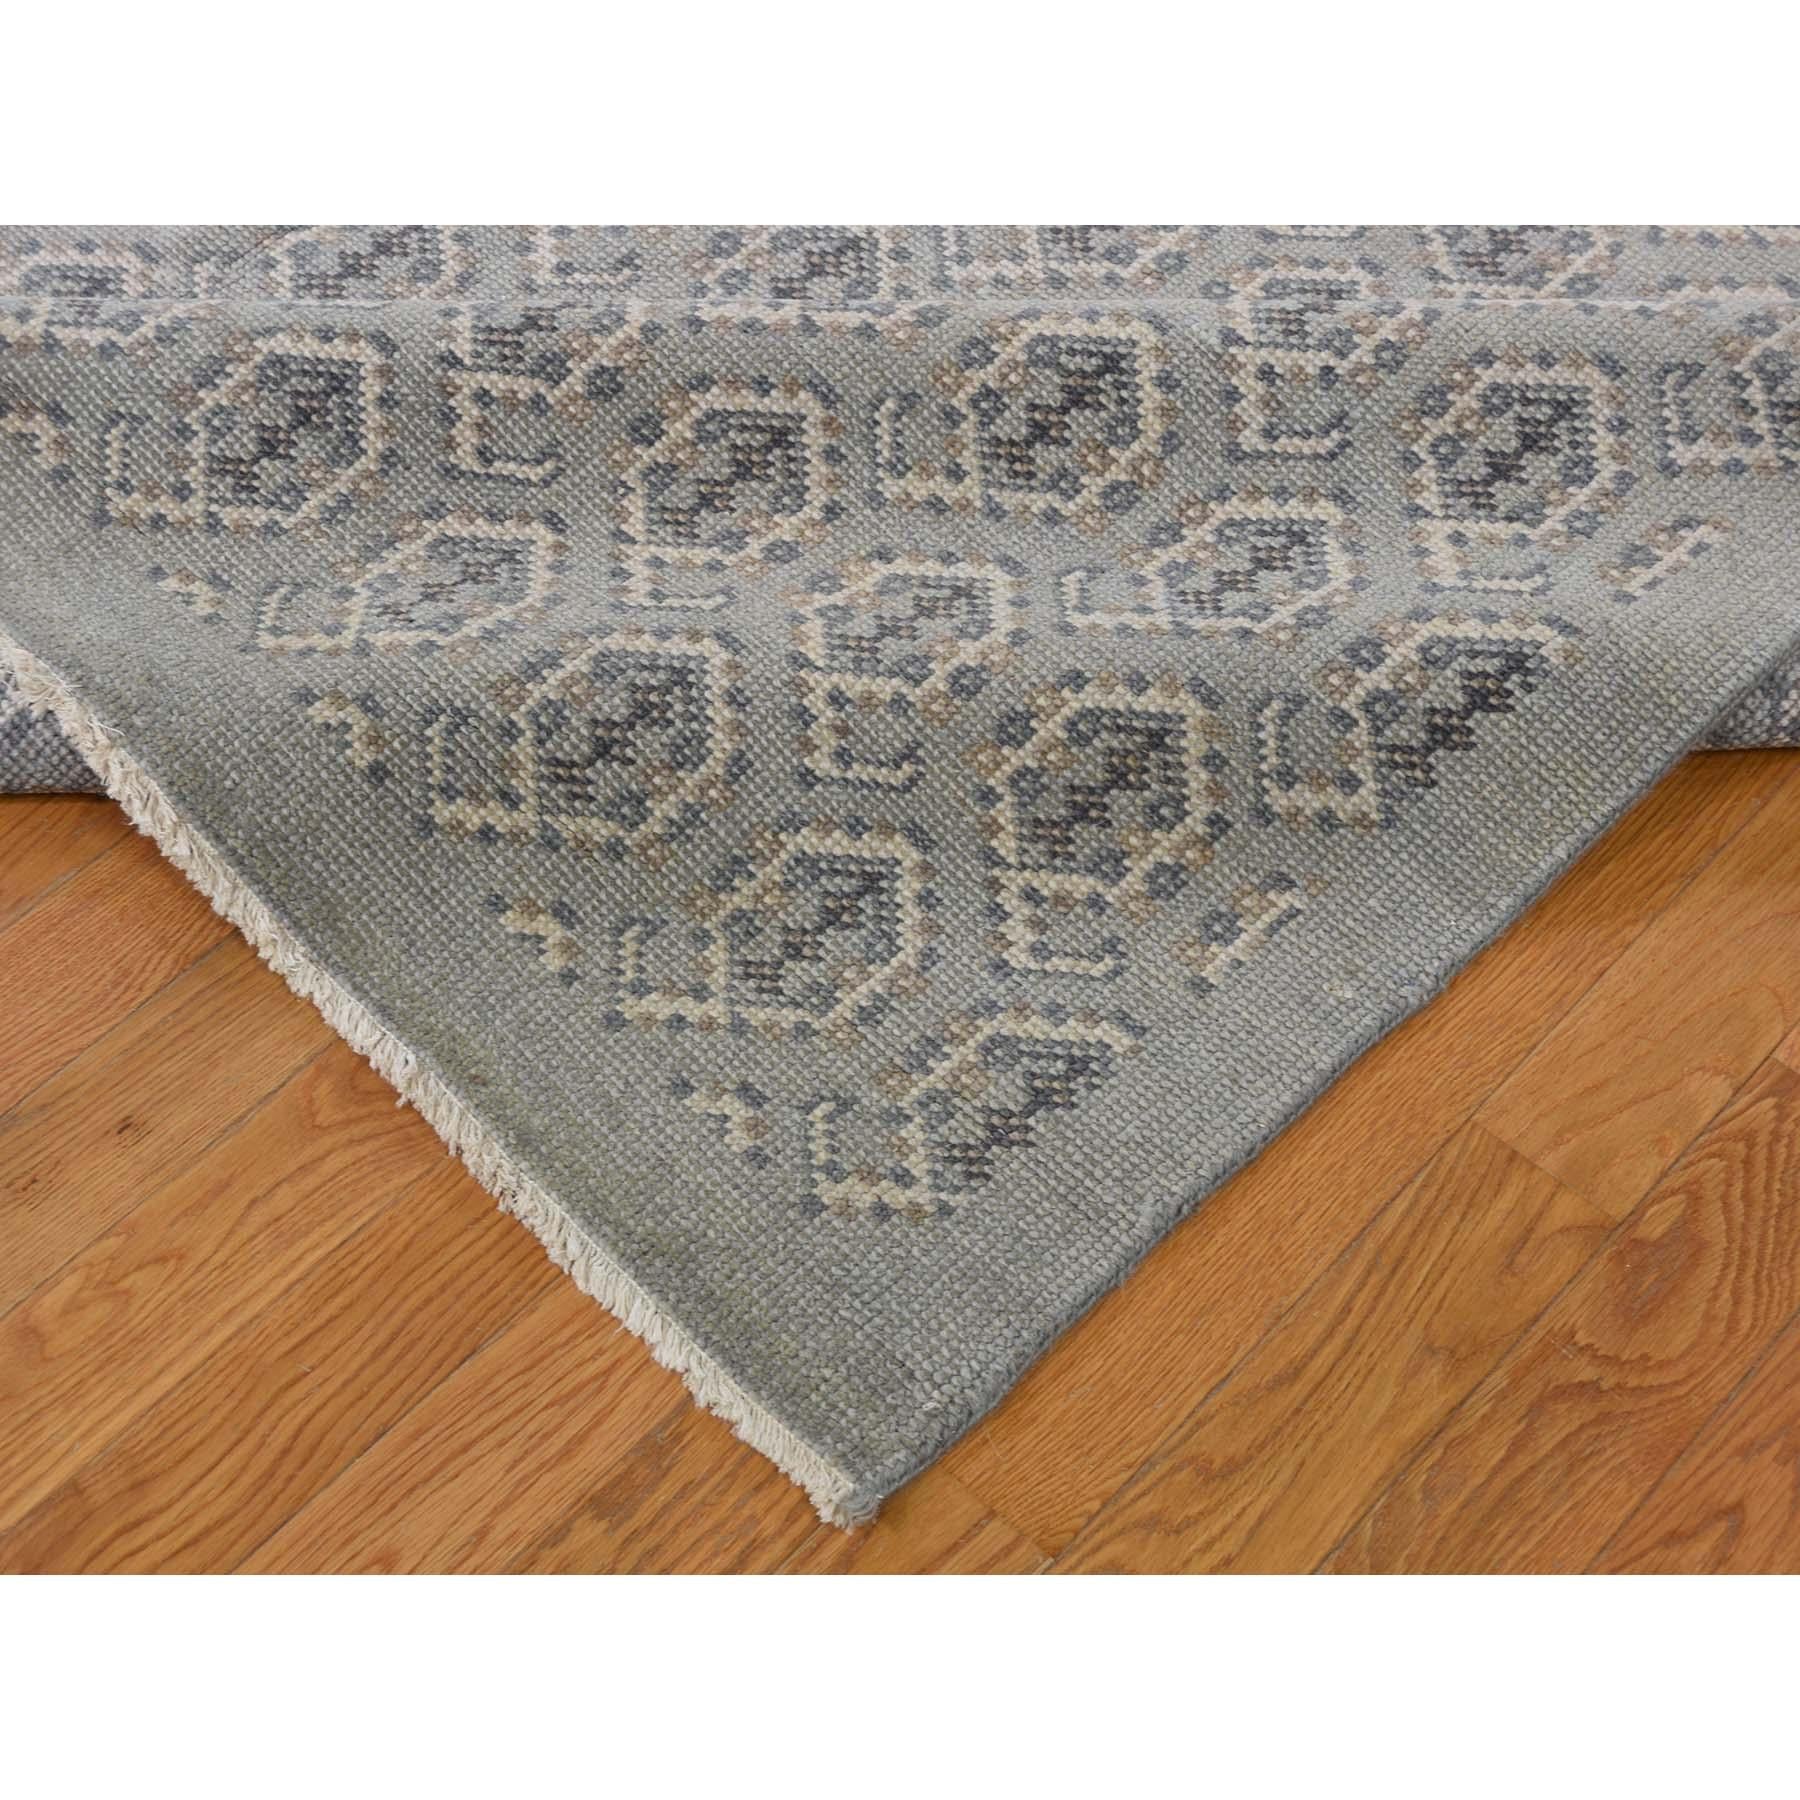 Contemporary Turkish Knot Paisley Design Oversize Hand Knotted Oriental Rug